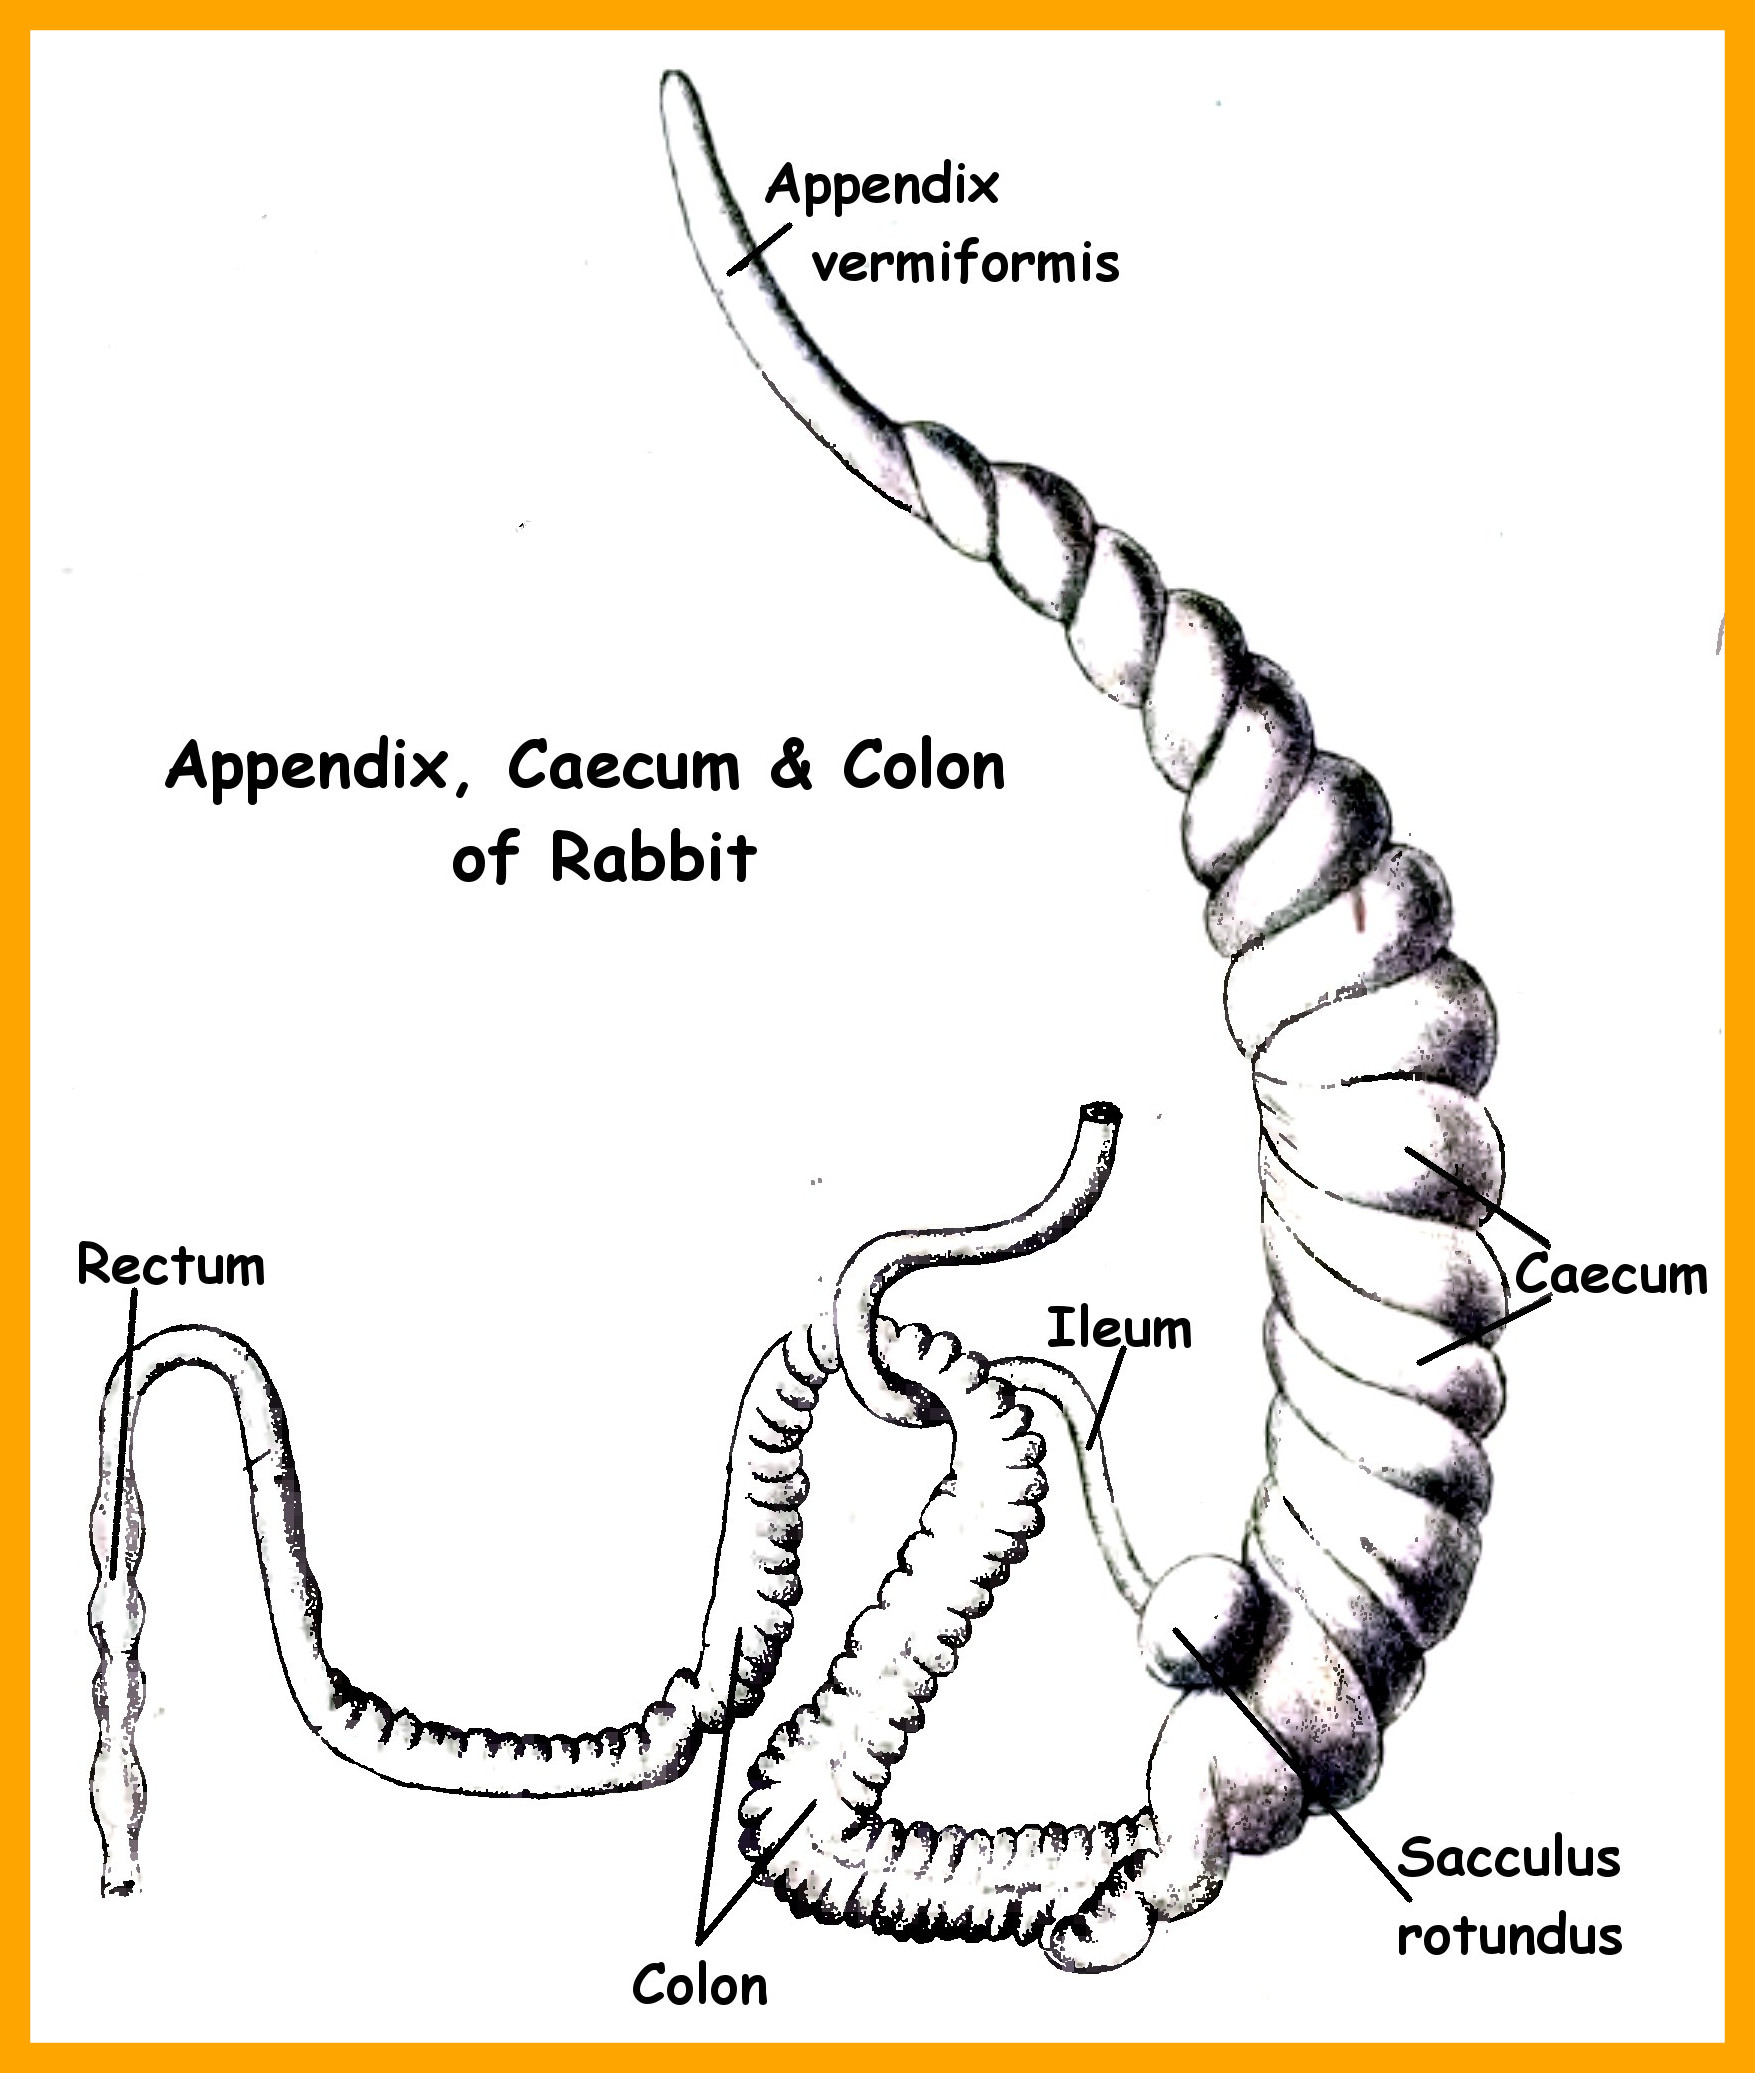 Male Anatomy Diagram Appendix - Lateral view of the orbit region of